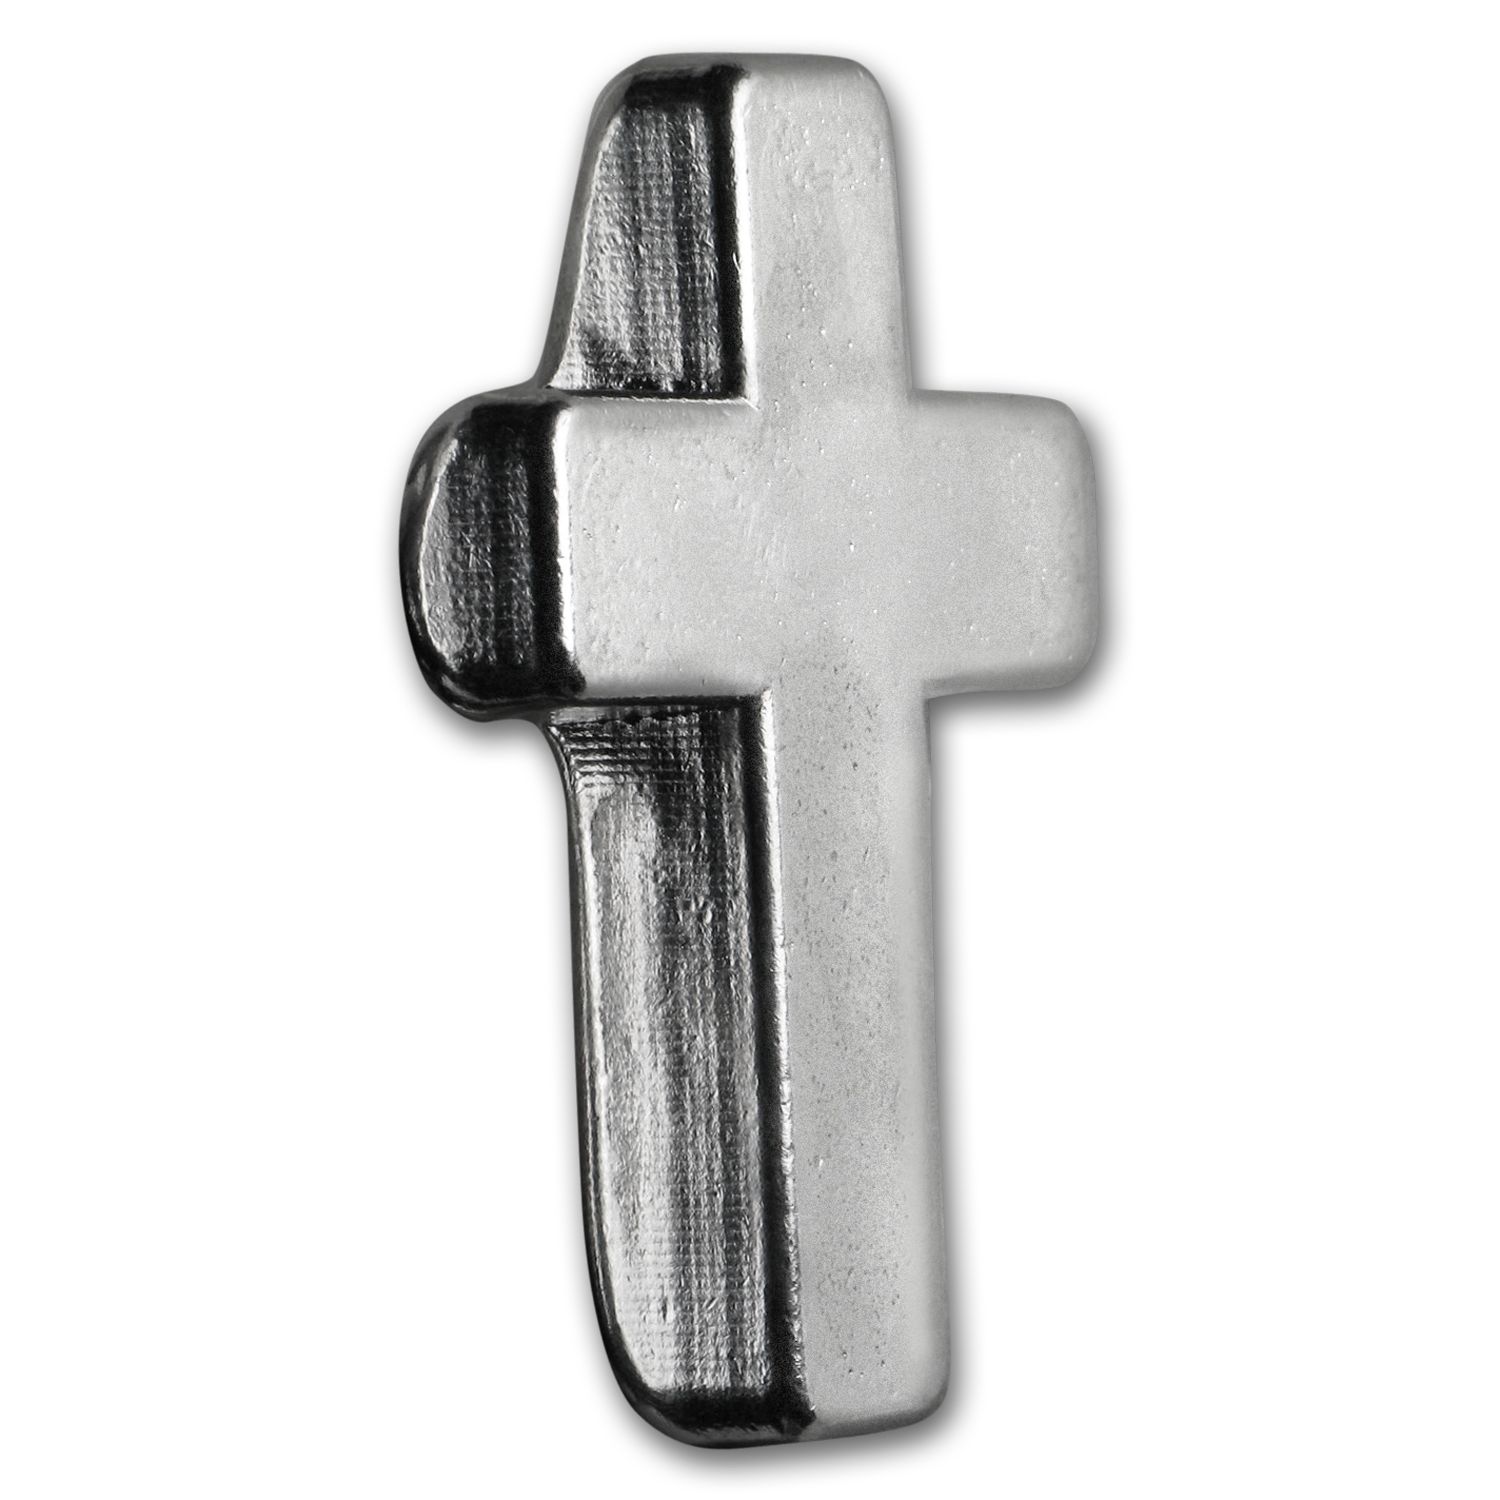 2 oz Hand-Poured Silver Cross